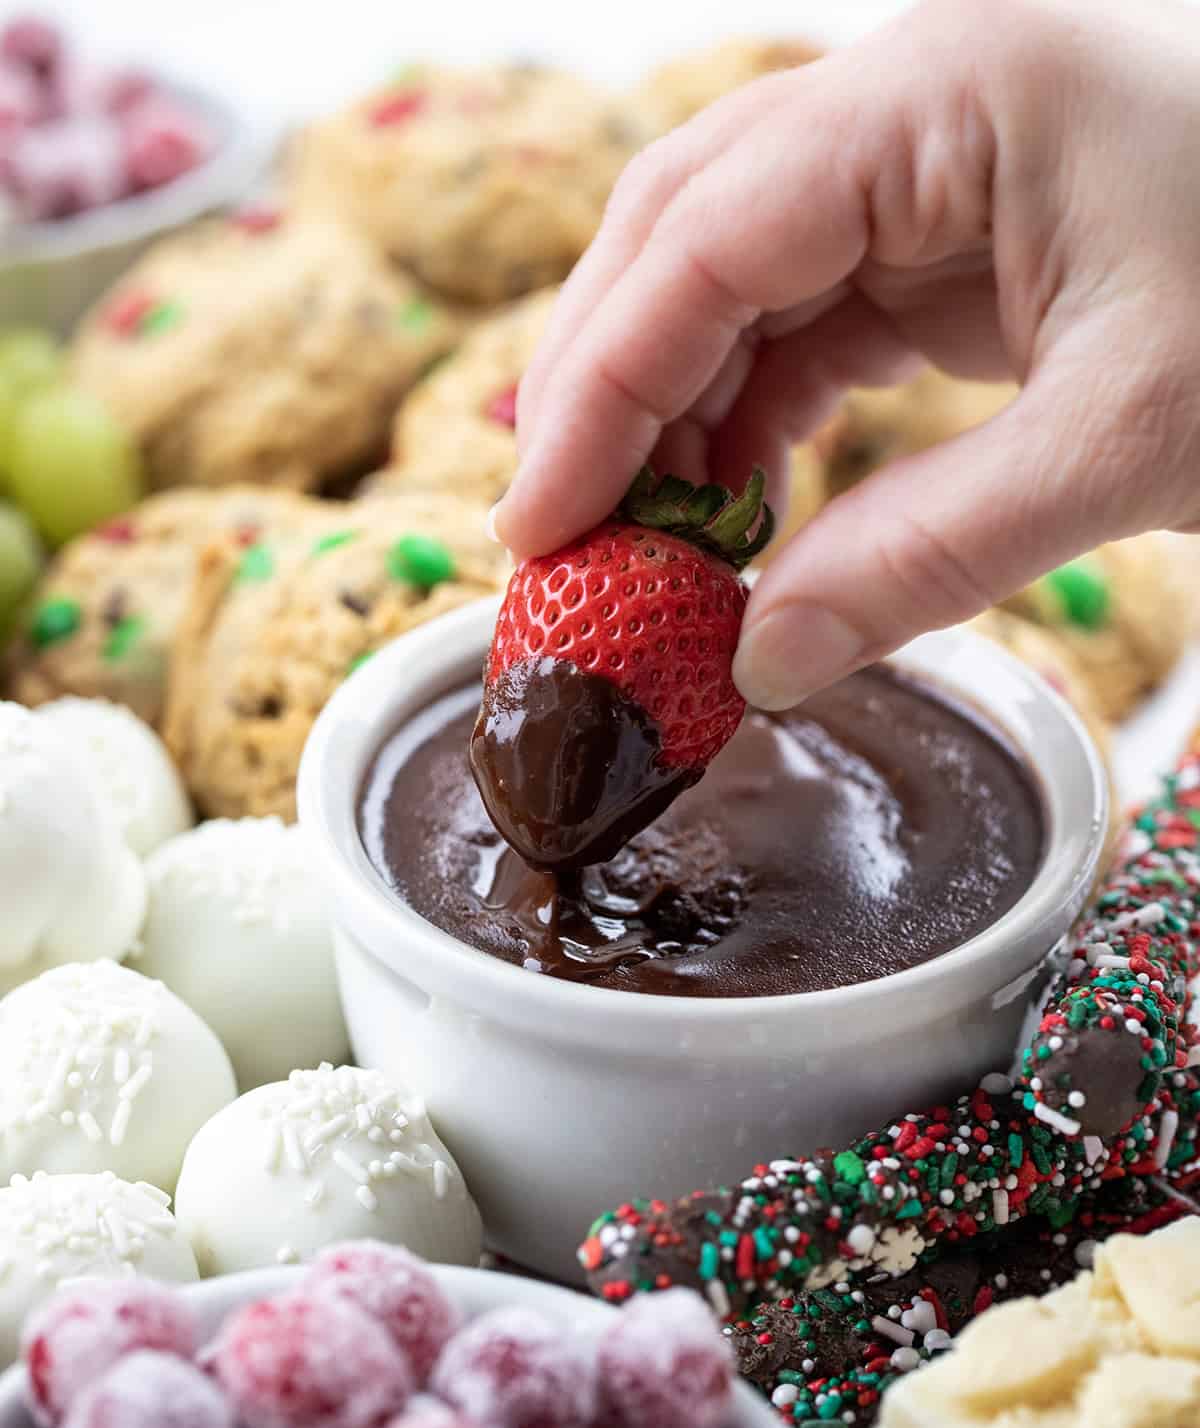 Dipping a Strawberry into Chocolate Ganache on a Christmas Dessert Charcuterie Board.